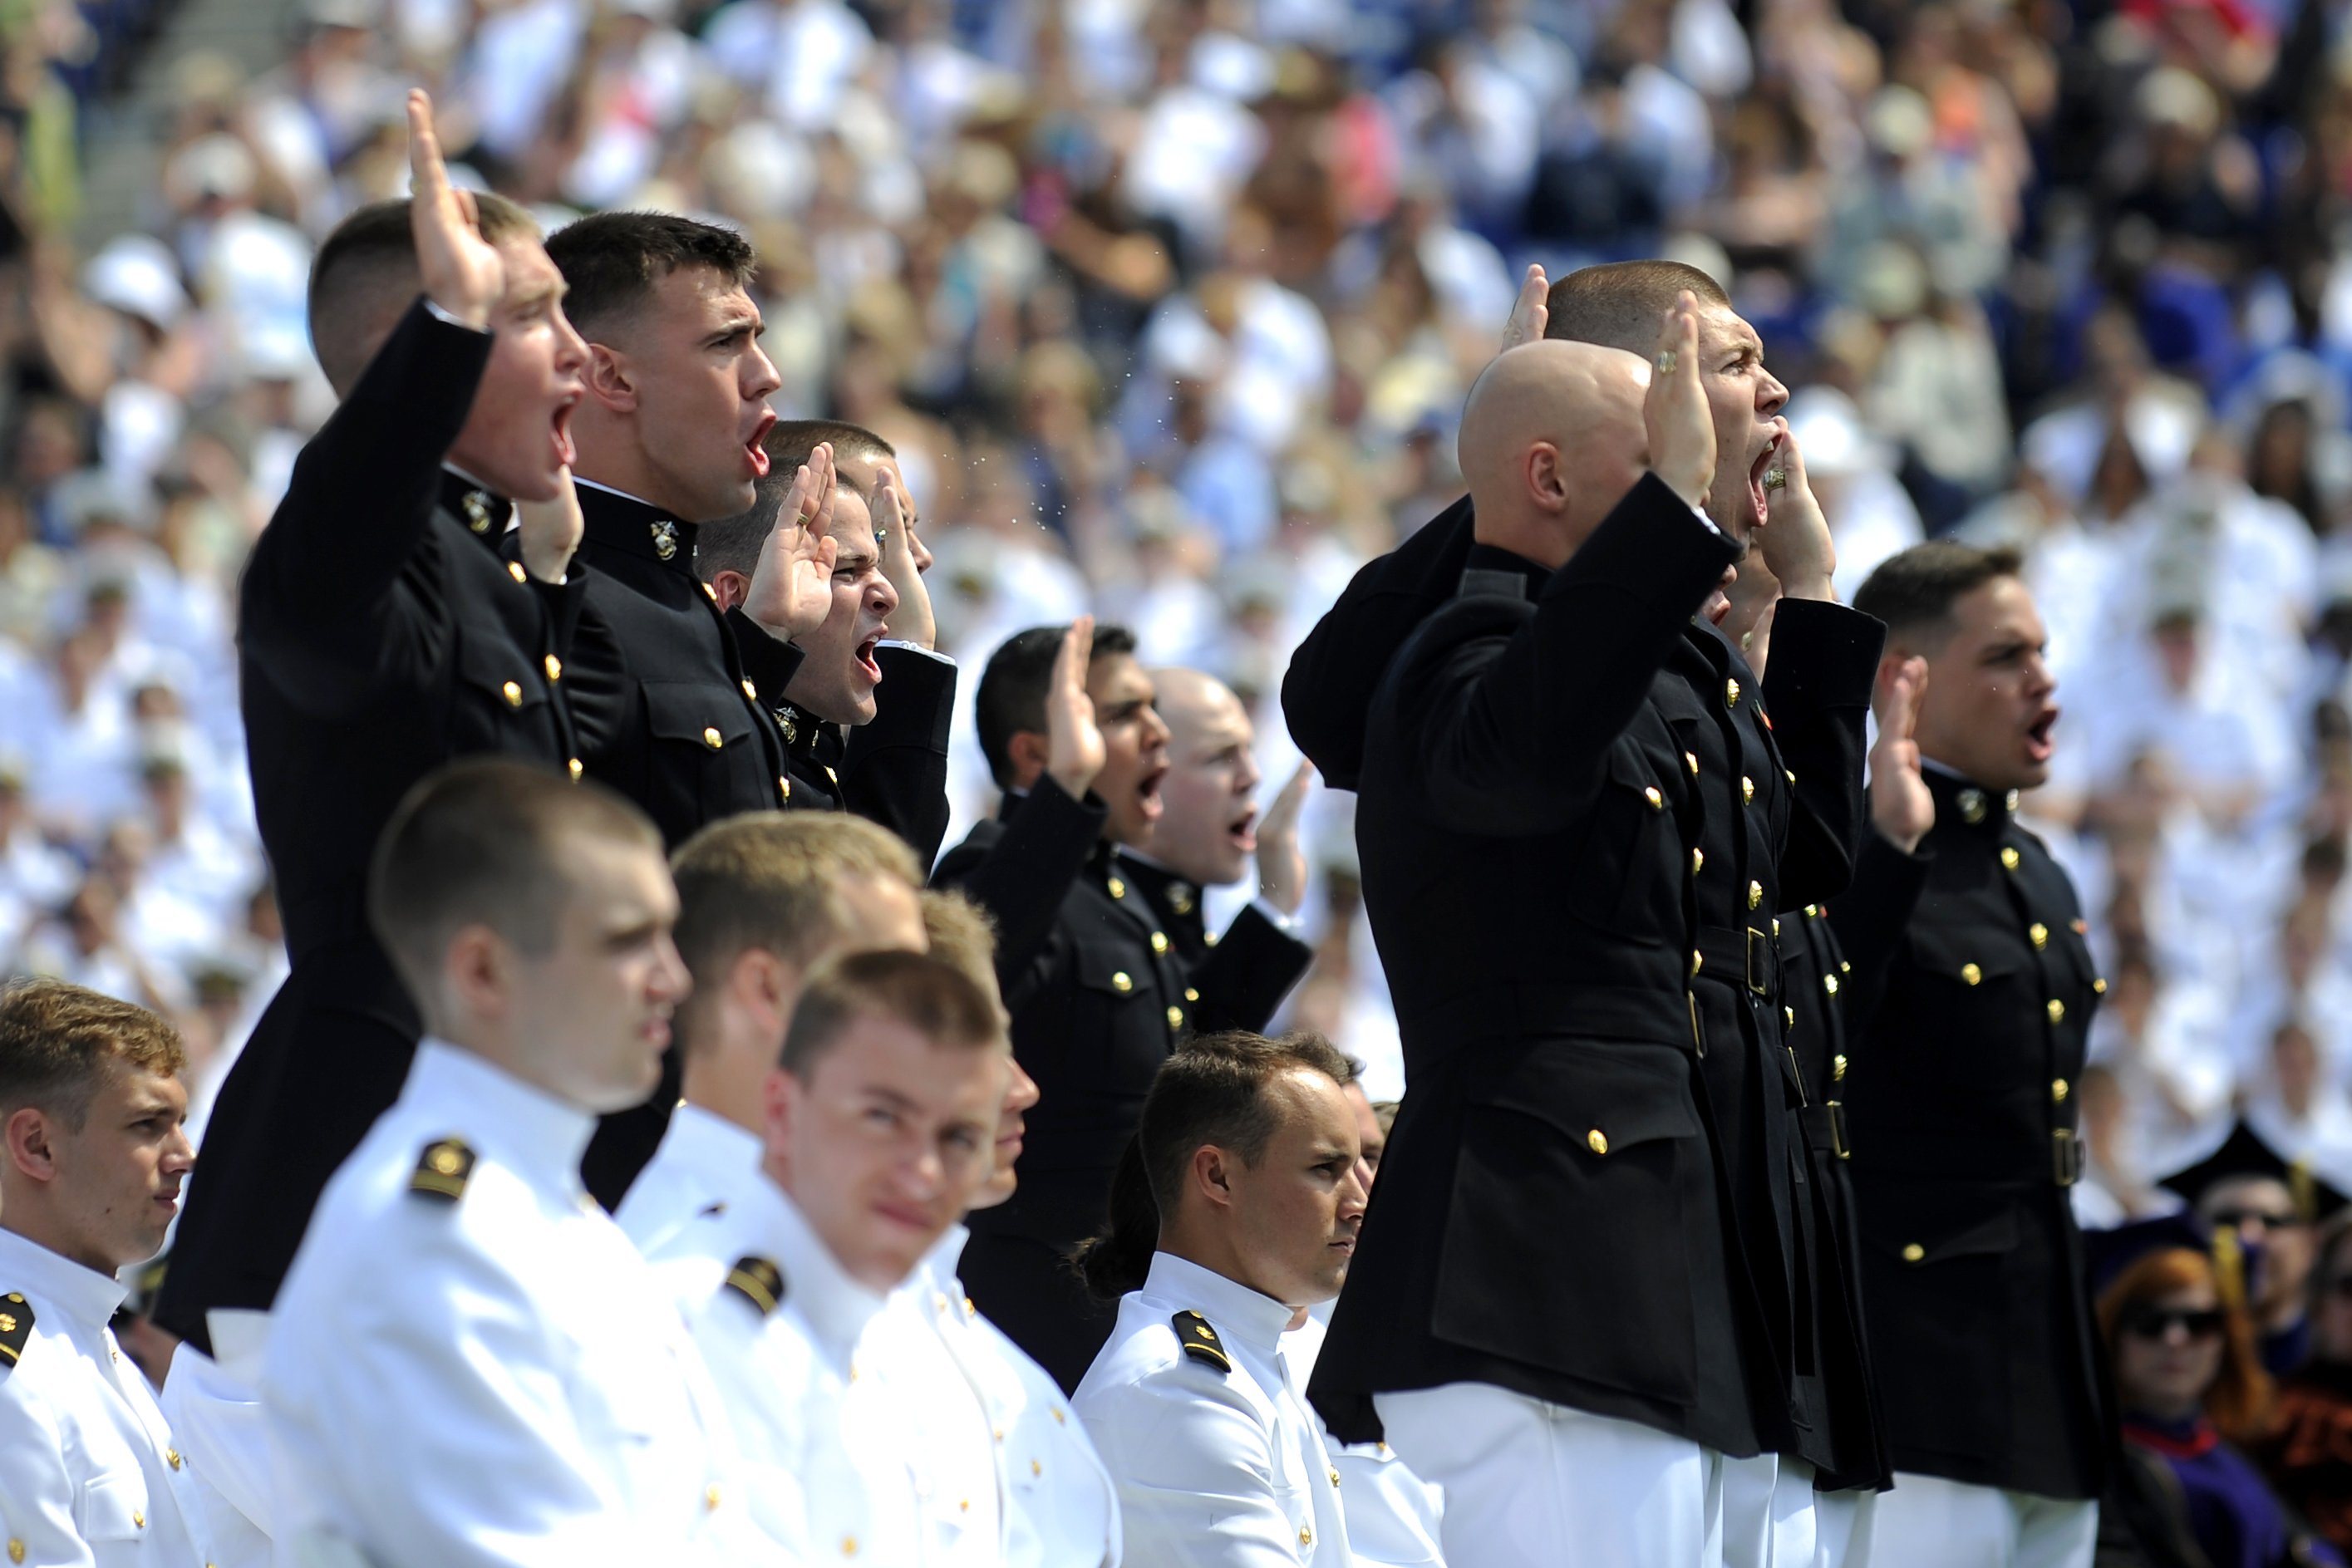 U.S. Marine cadets take the oath of enlistment during the U.S. Naval